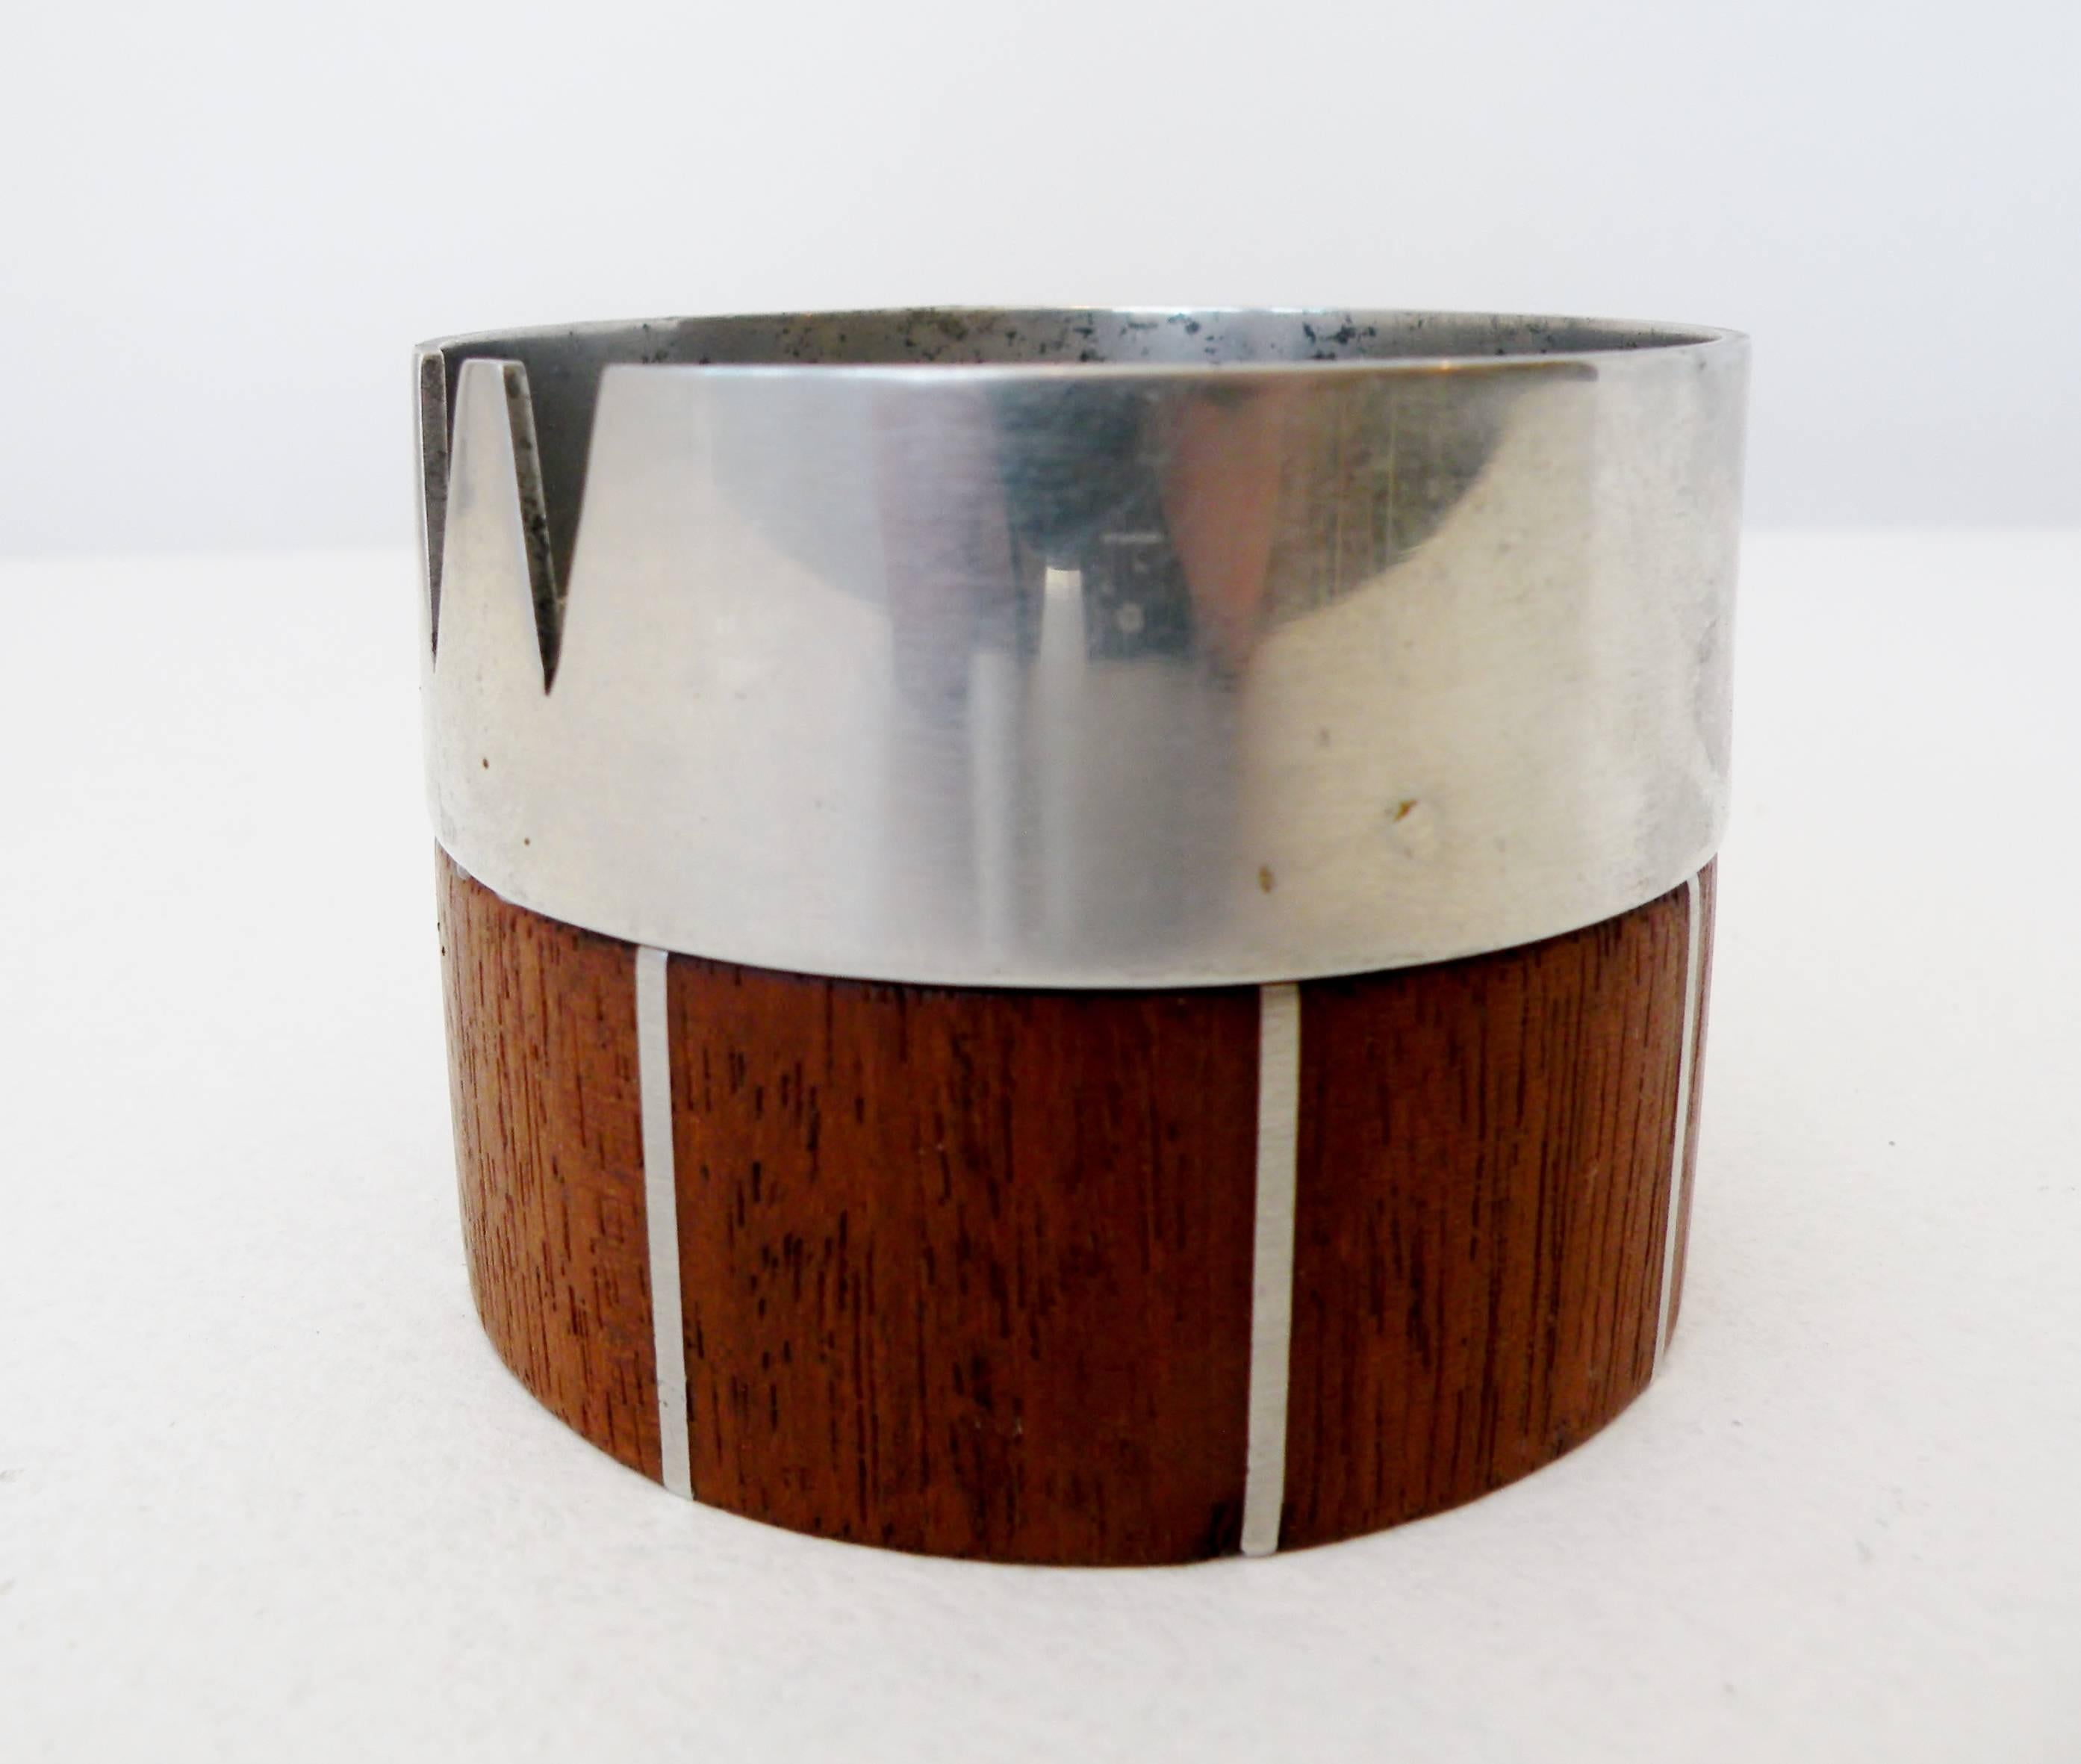 A late 1950s stainless steel and walnut ash receiver designed by Phillip Llyod Powell and Paul Evans for their in house workshop.